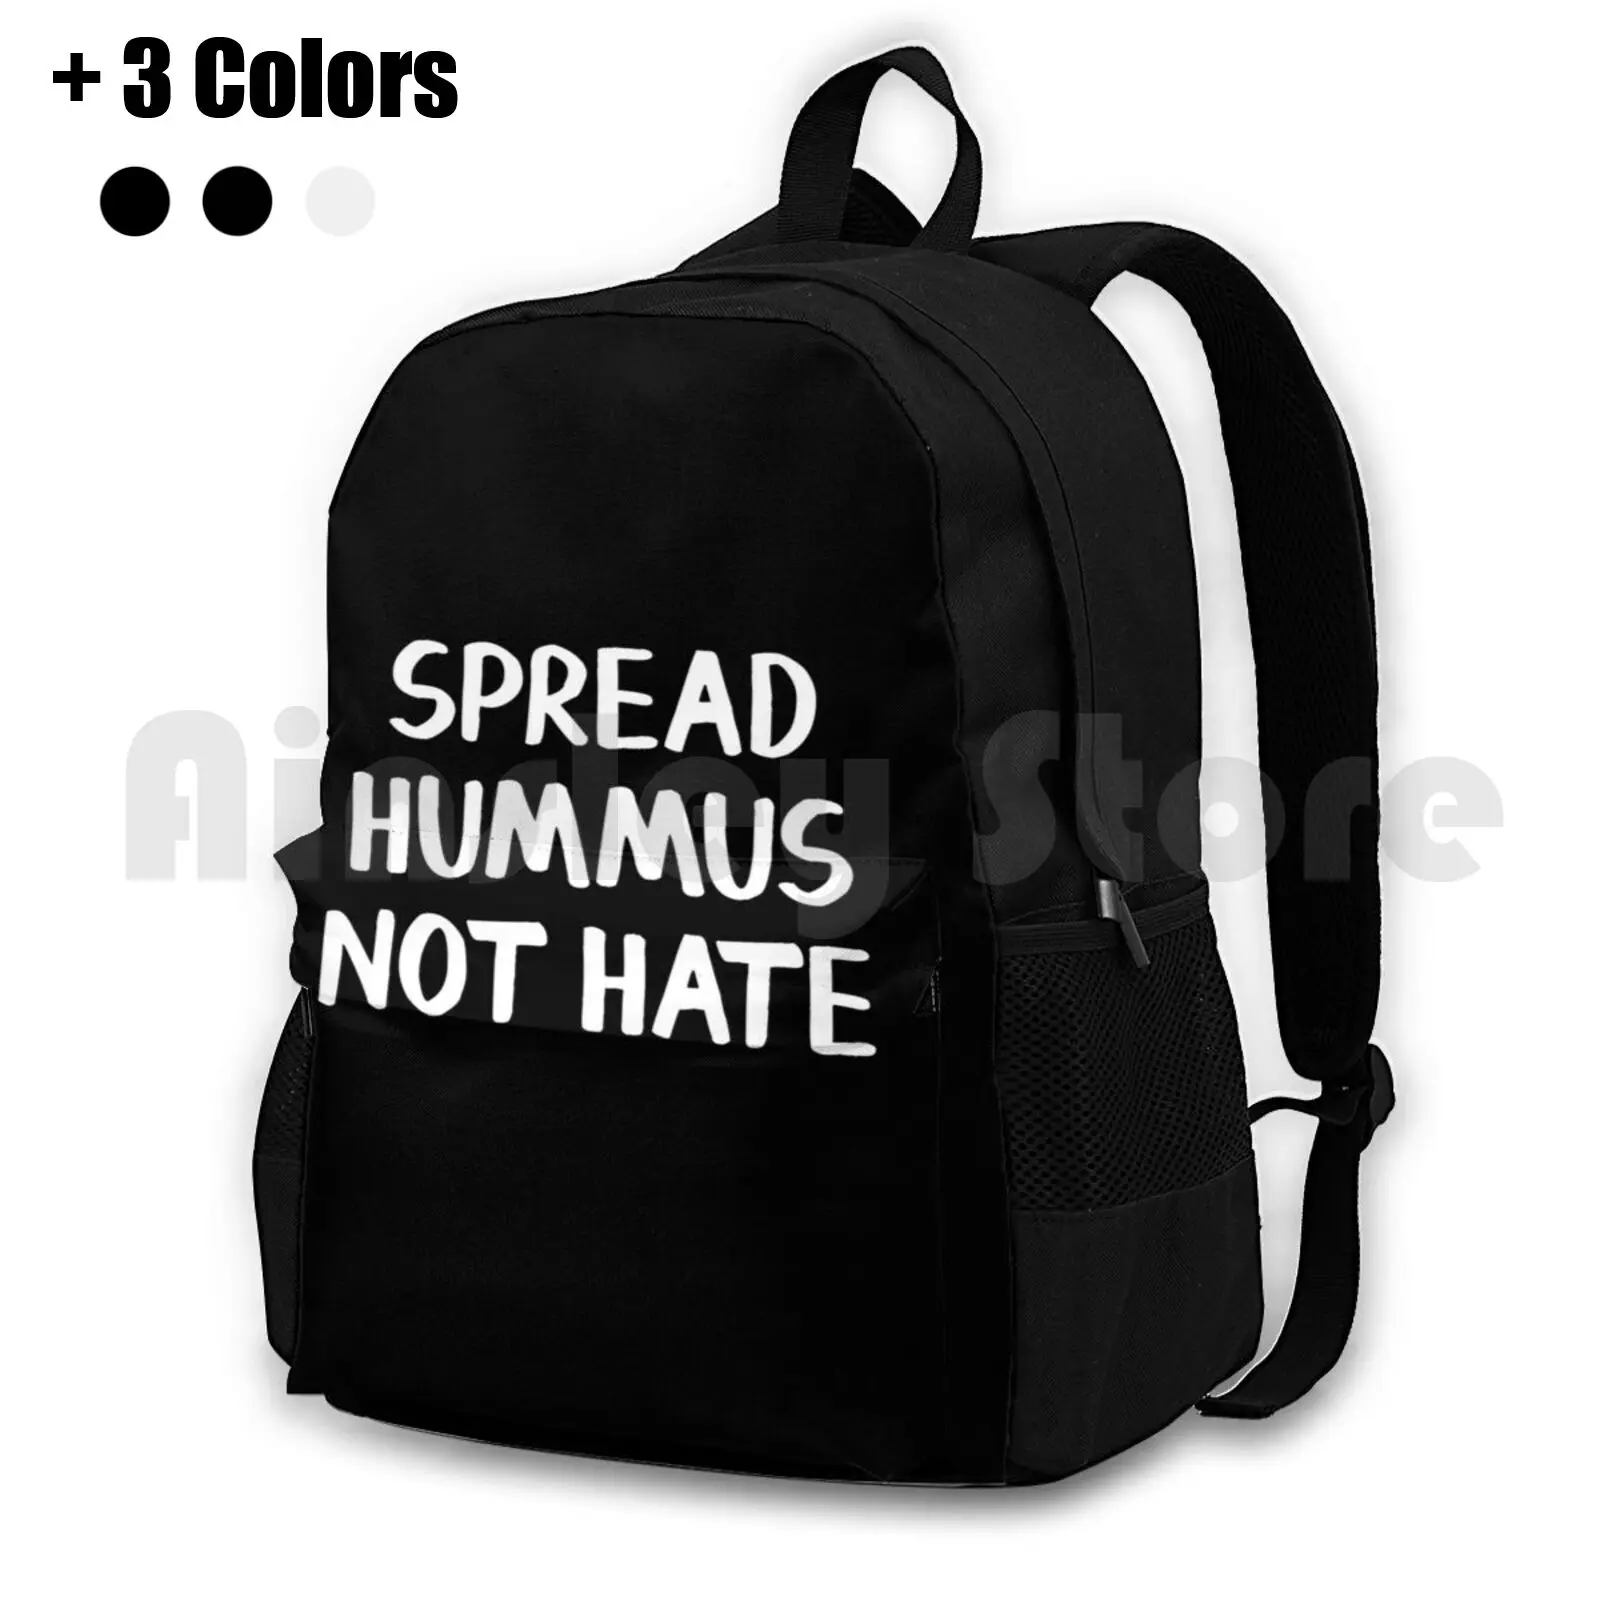 

Spread Hummus Not Hate Outdoor Hiking Backpack Waterproof Camping Travel Spread Hummus Not Hate Not Hate Hate Has No Home Here